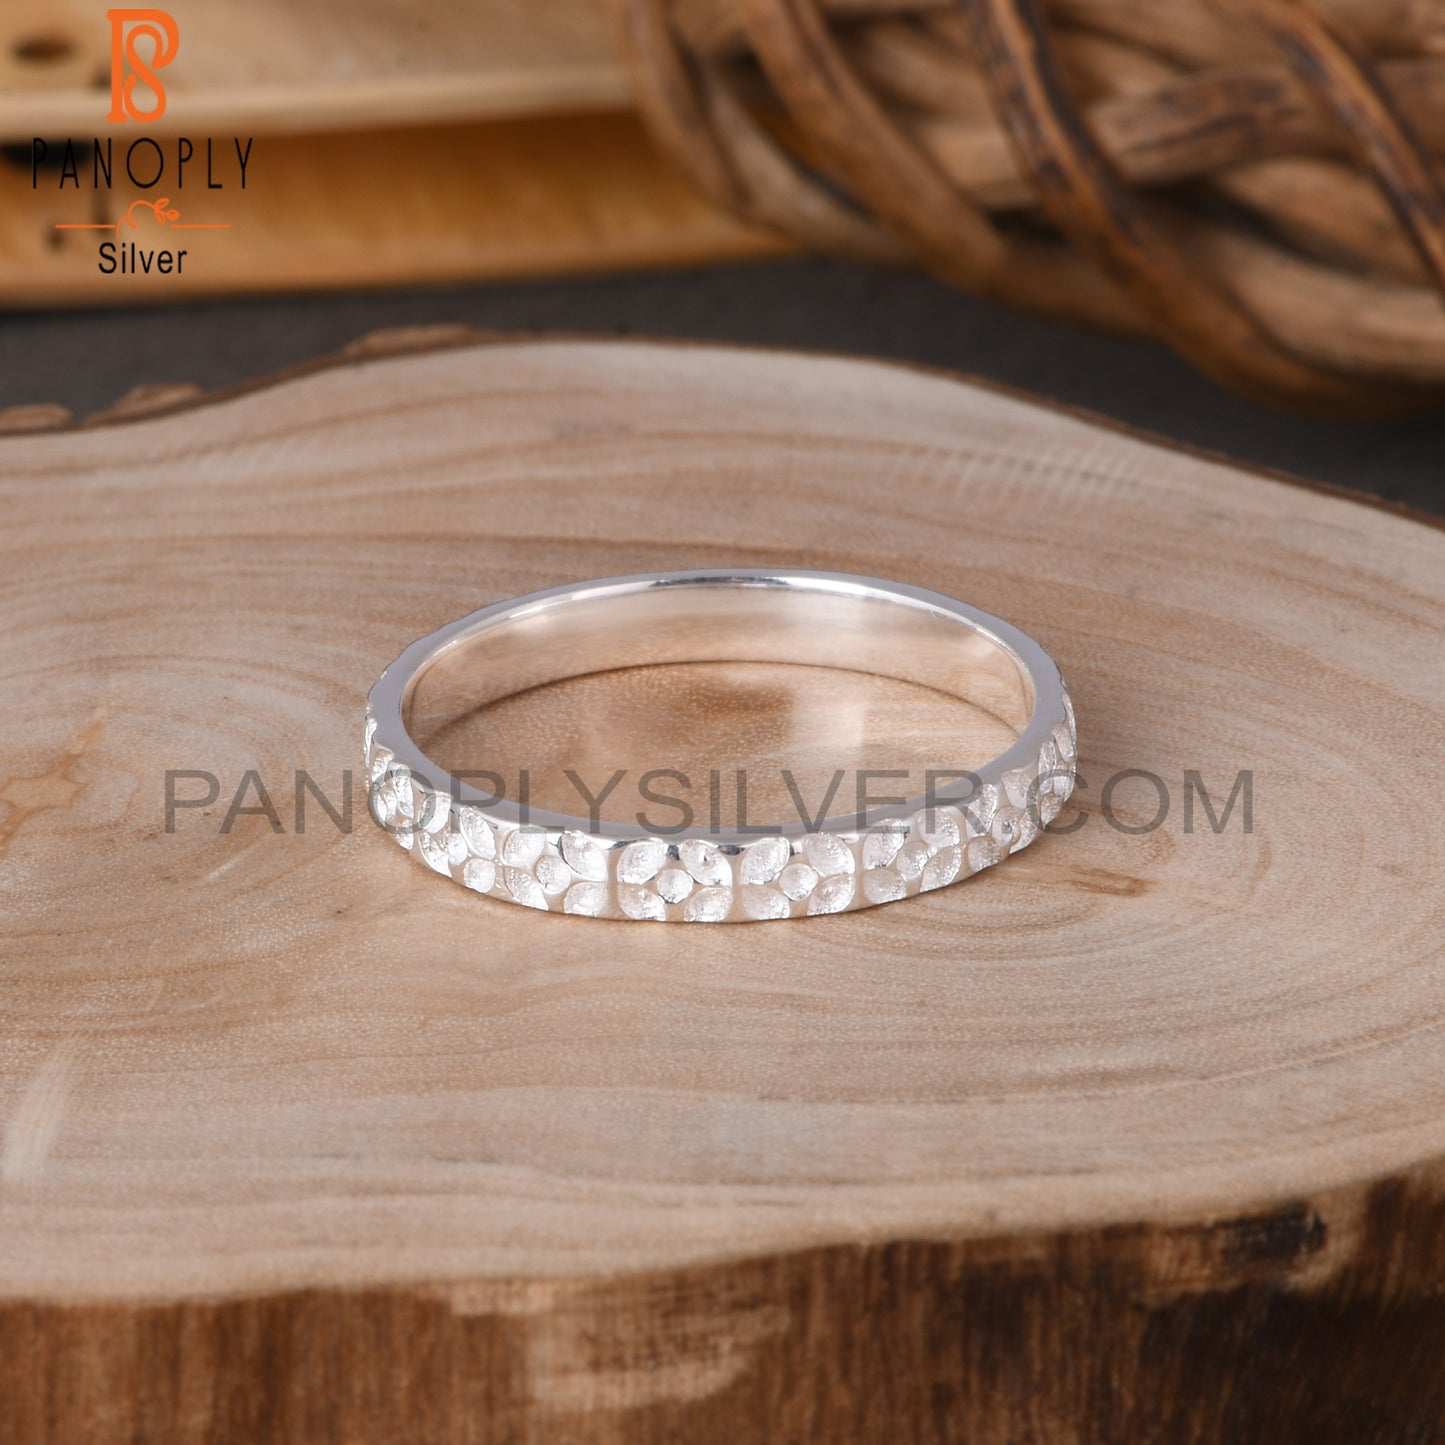 White Plain 925 Sterling Silver Ring Band